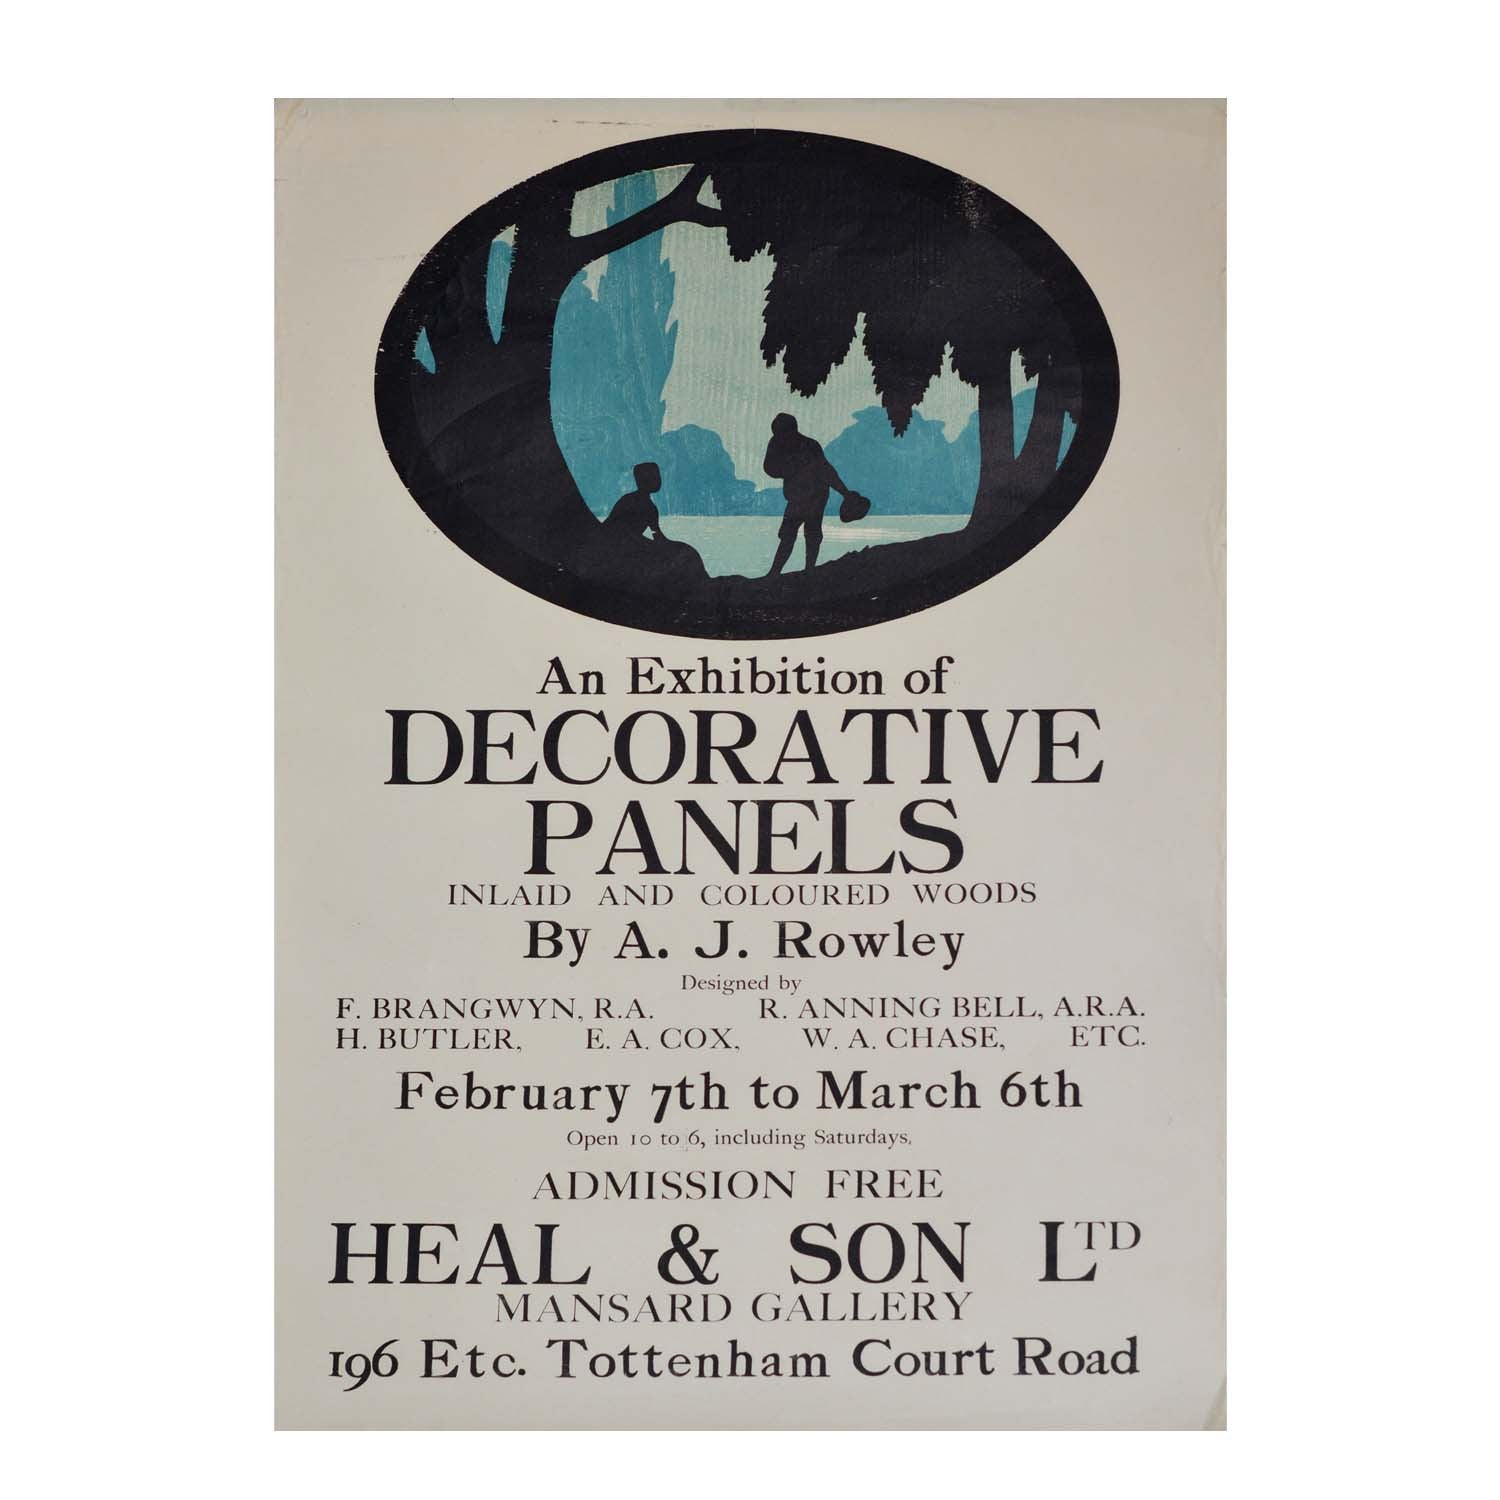 Original poster for the Mansard Gallery in Heal's department store, designed by A.J. Rowley in c.1925. It features a design by WA Chase, 'The Meeting', from his 'Watteau' series.